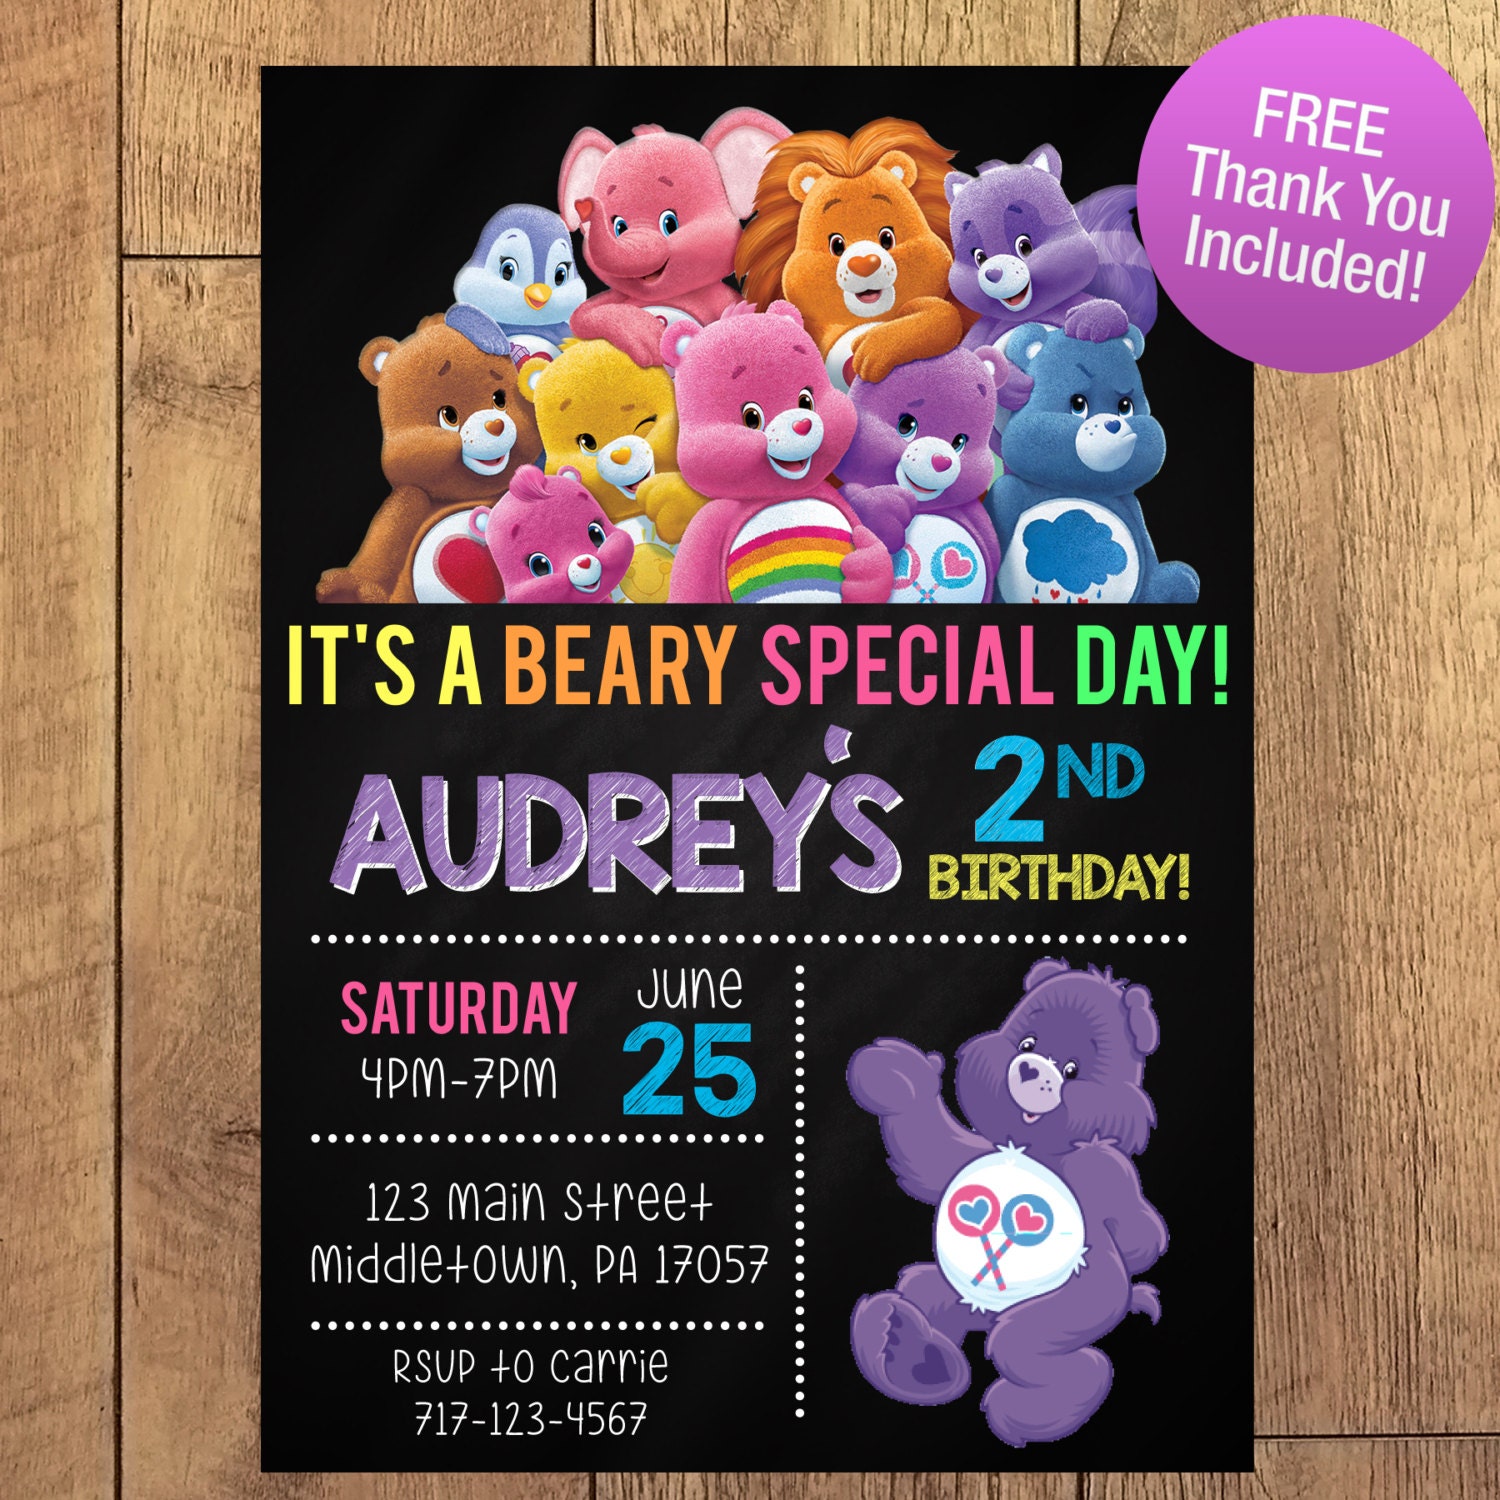 care-bear-birthday-party-invitation-free-thank-you-included